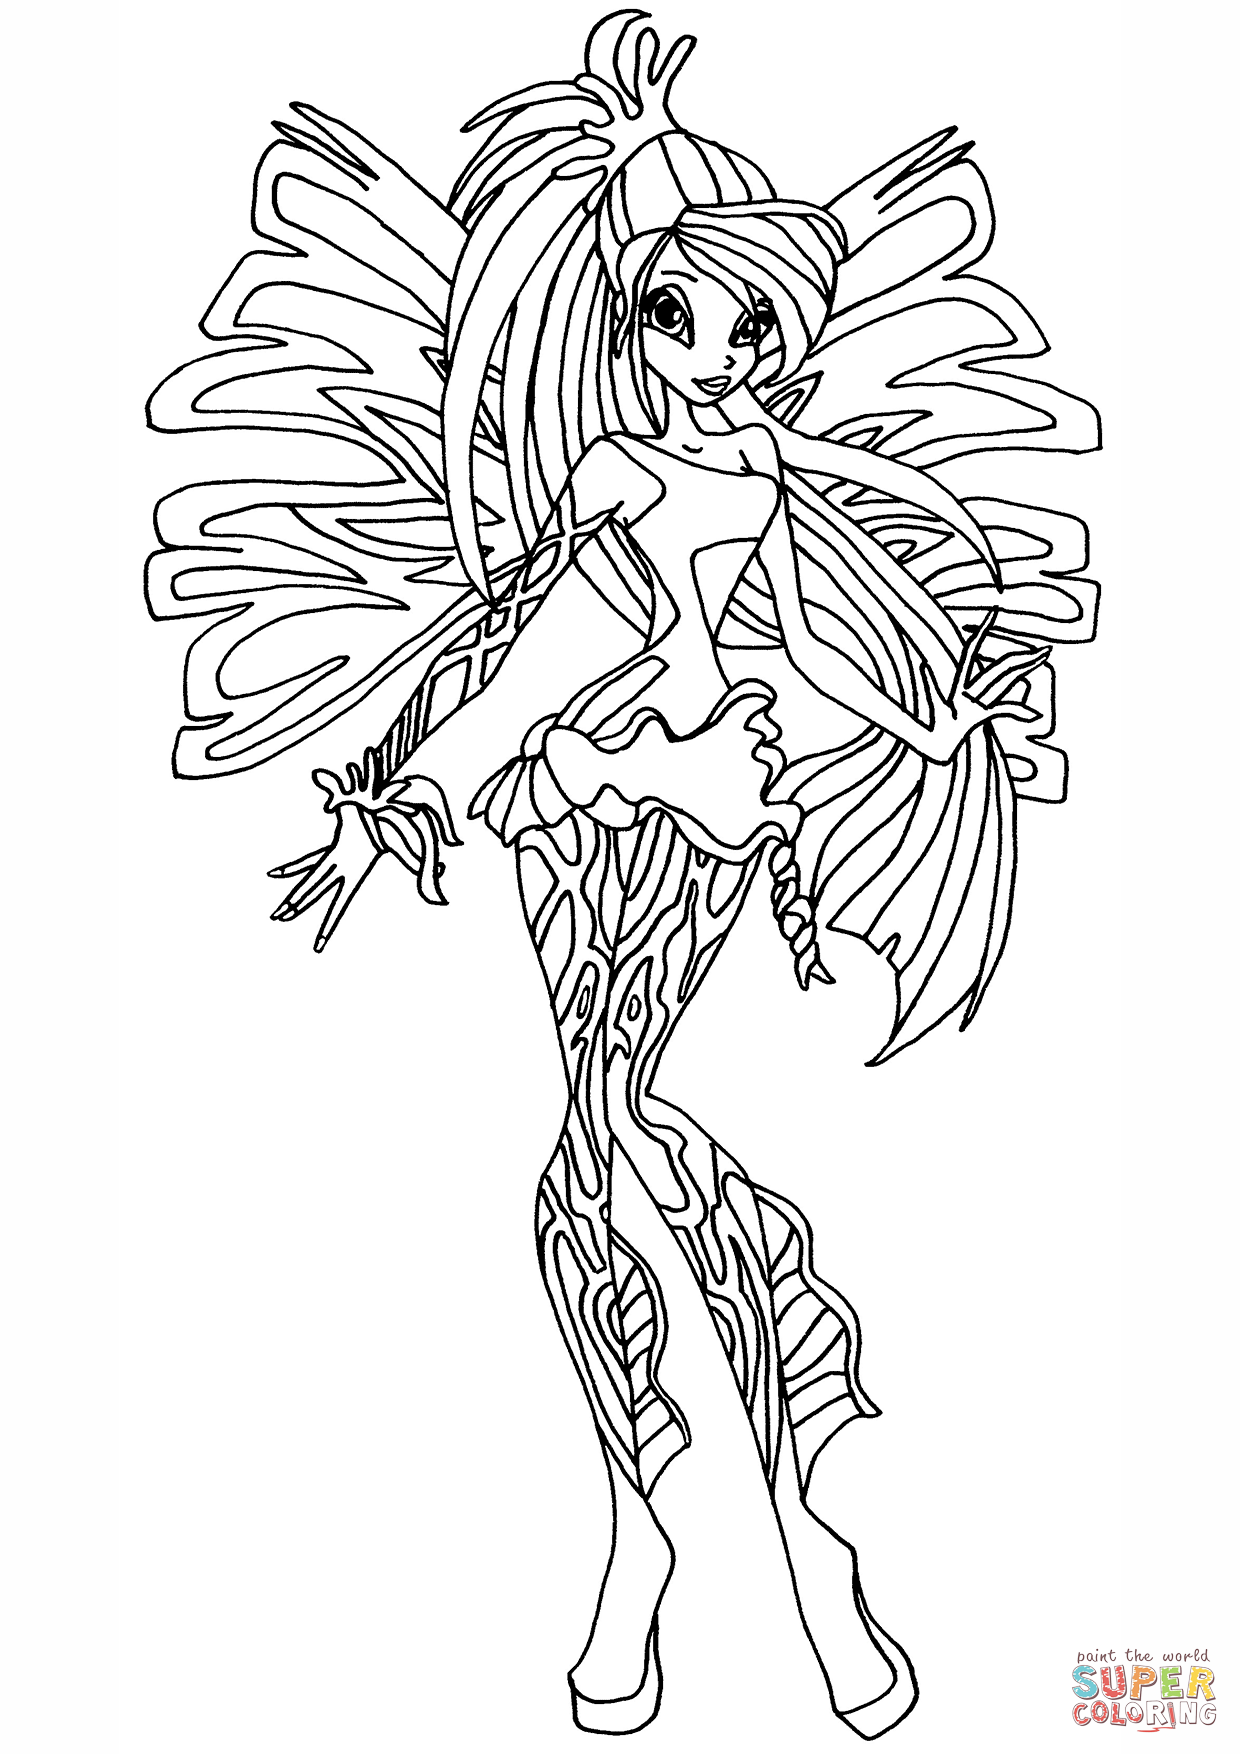 Winx Club Sirenix Bloom coloring page | Free Printable Coloring Pages